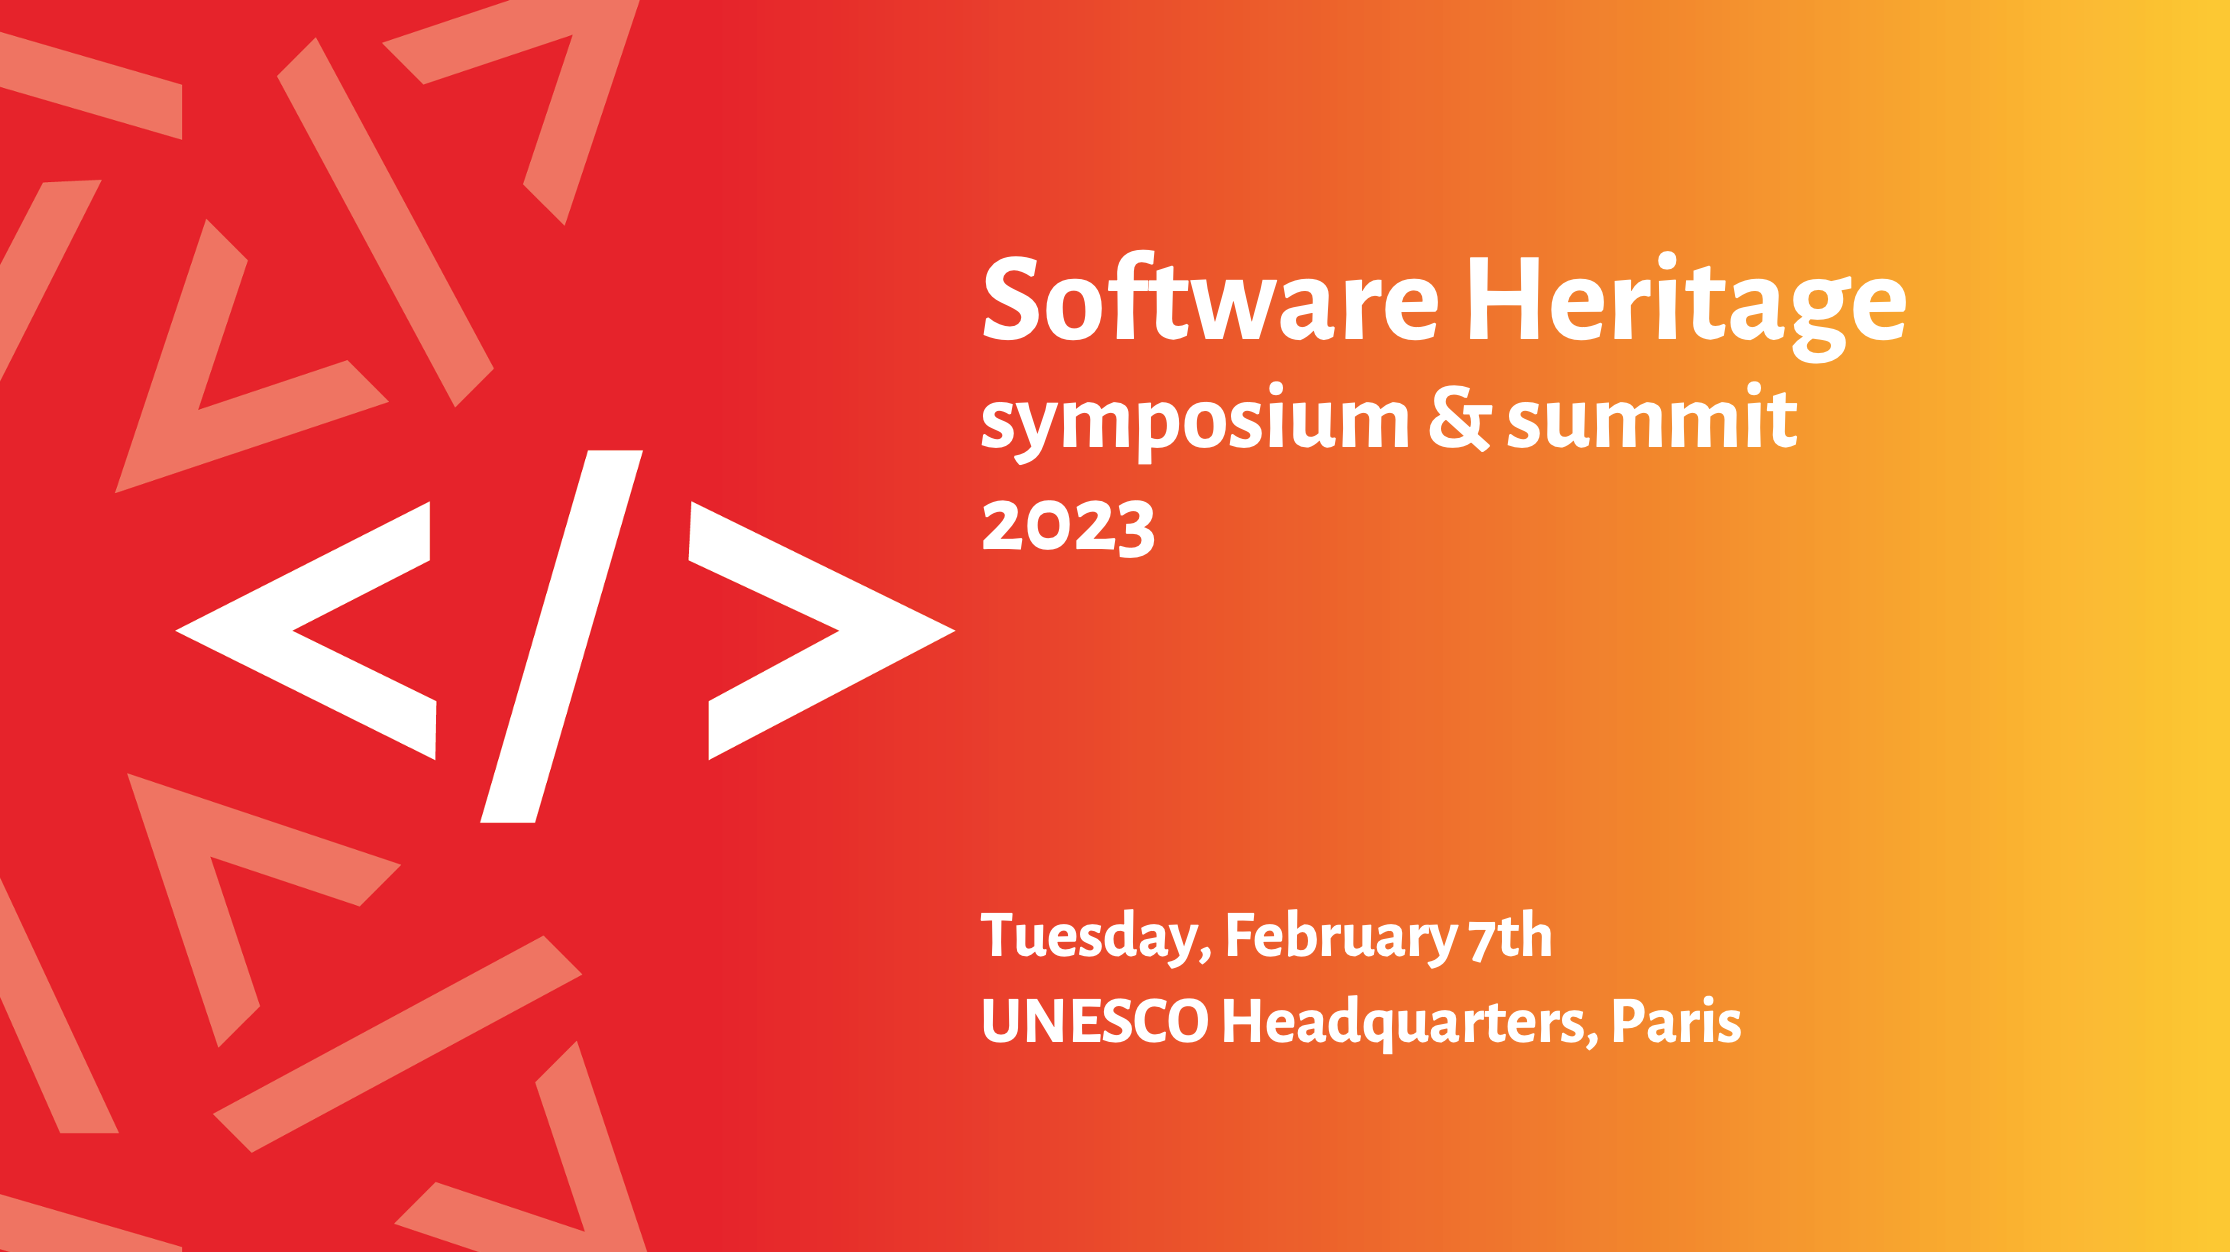 Software Heritage annual community event